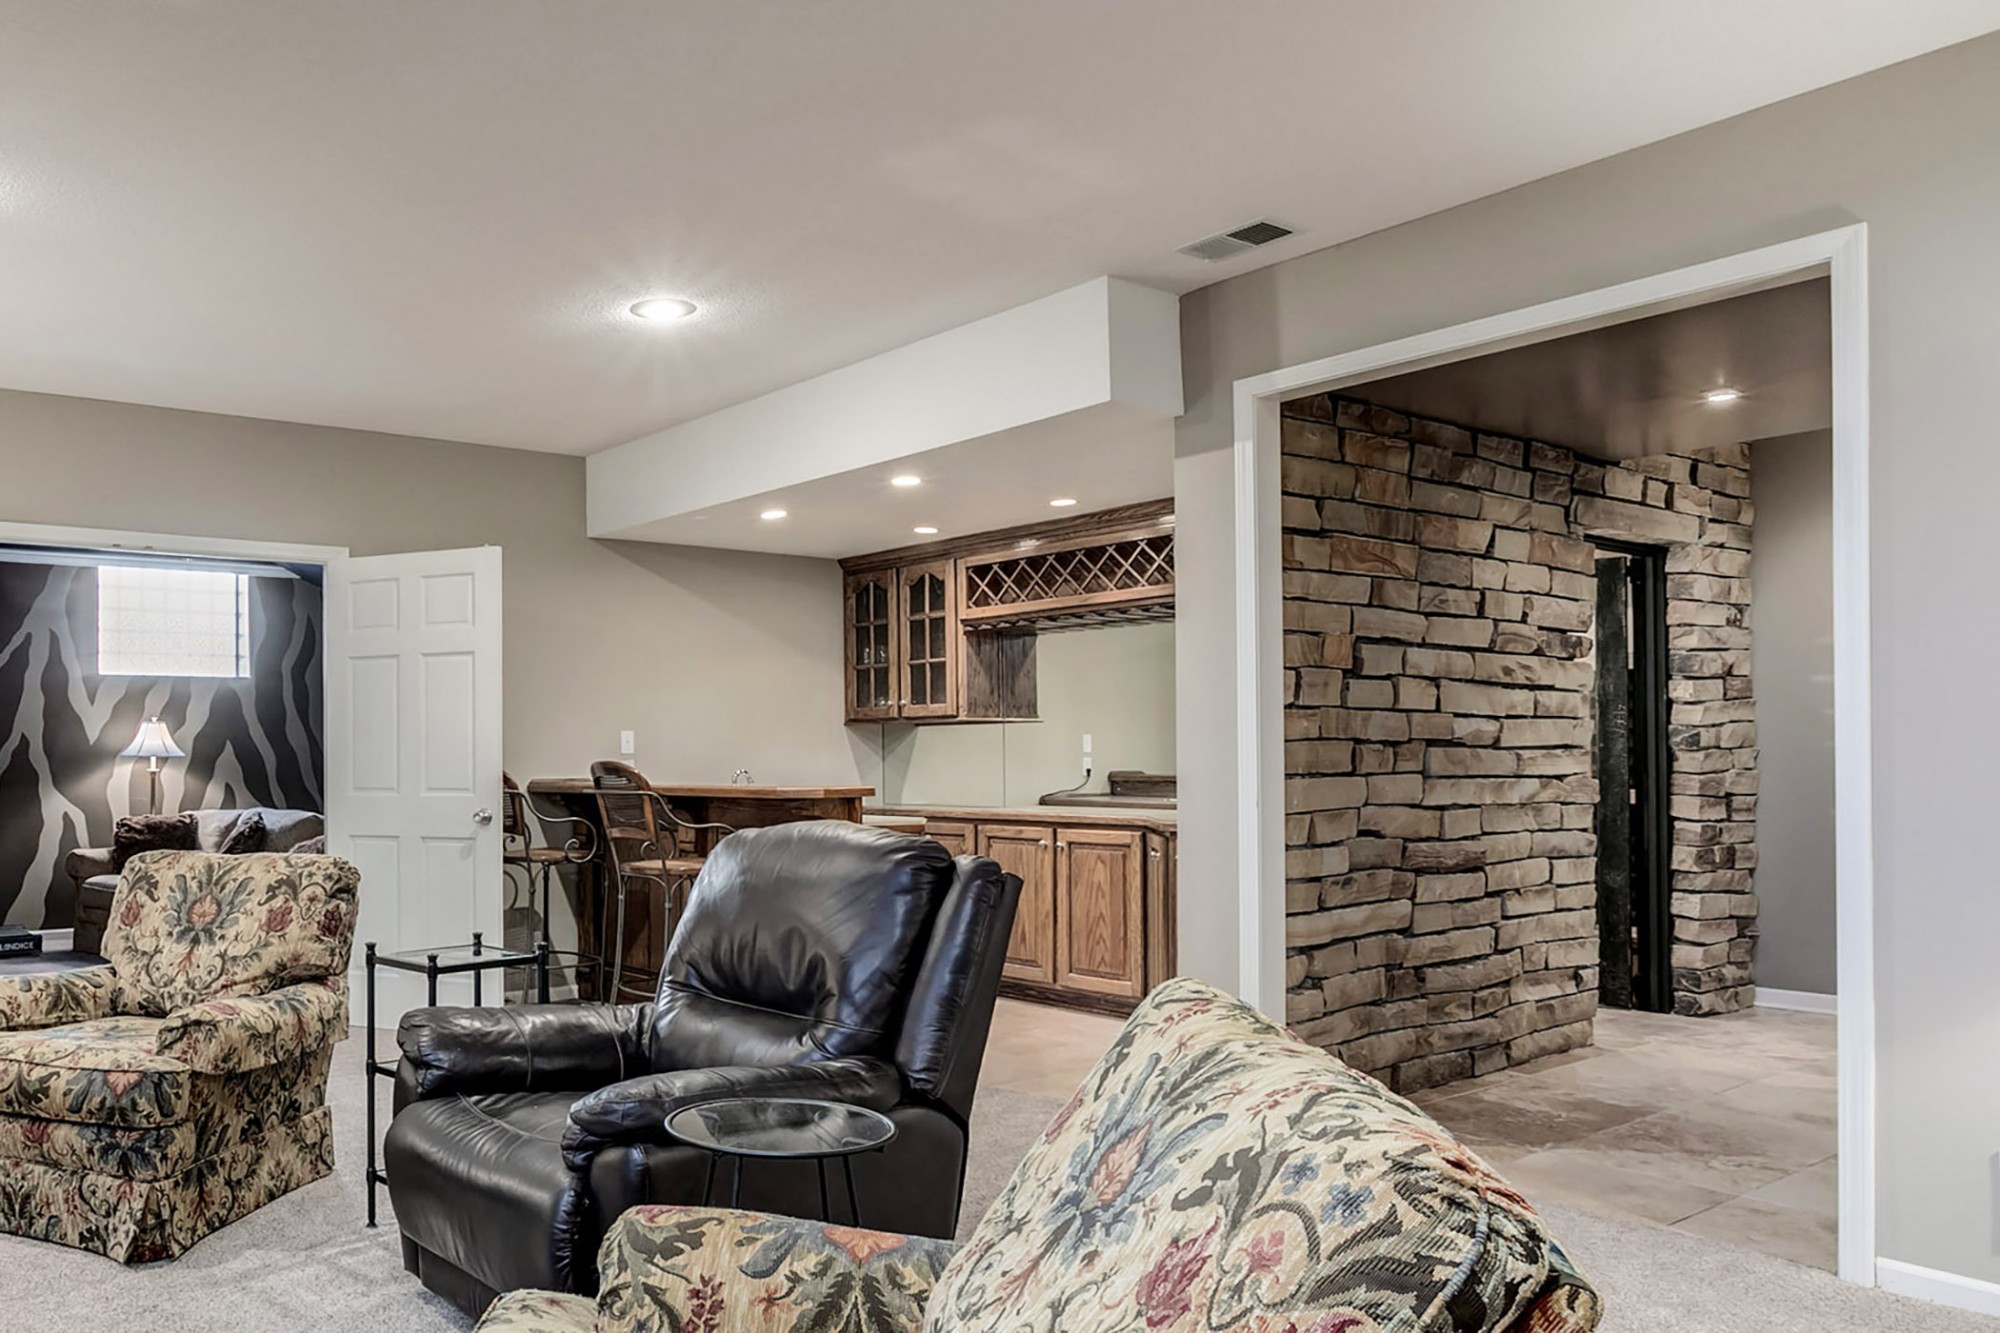 Adjacent to the rec room is a custom stacked stone wall leading to the remarkable wine cellar and tasting room.